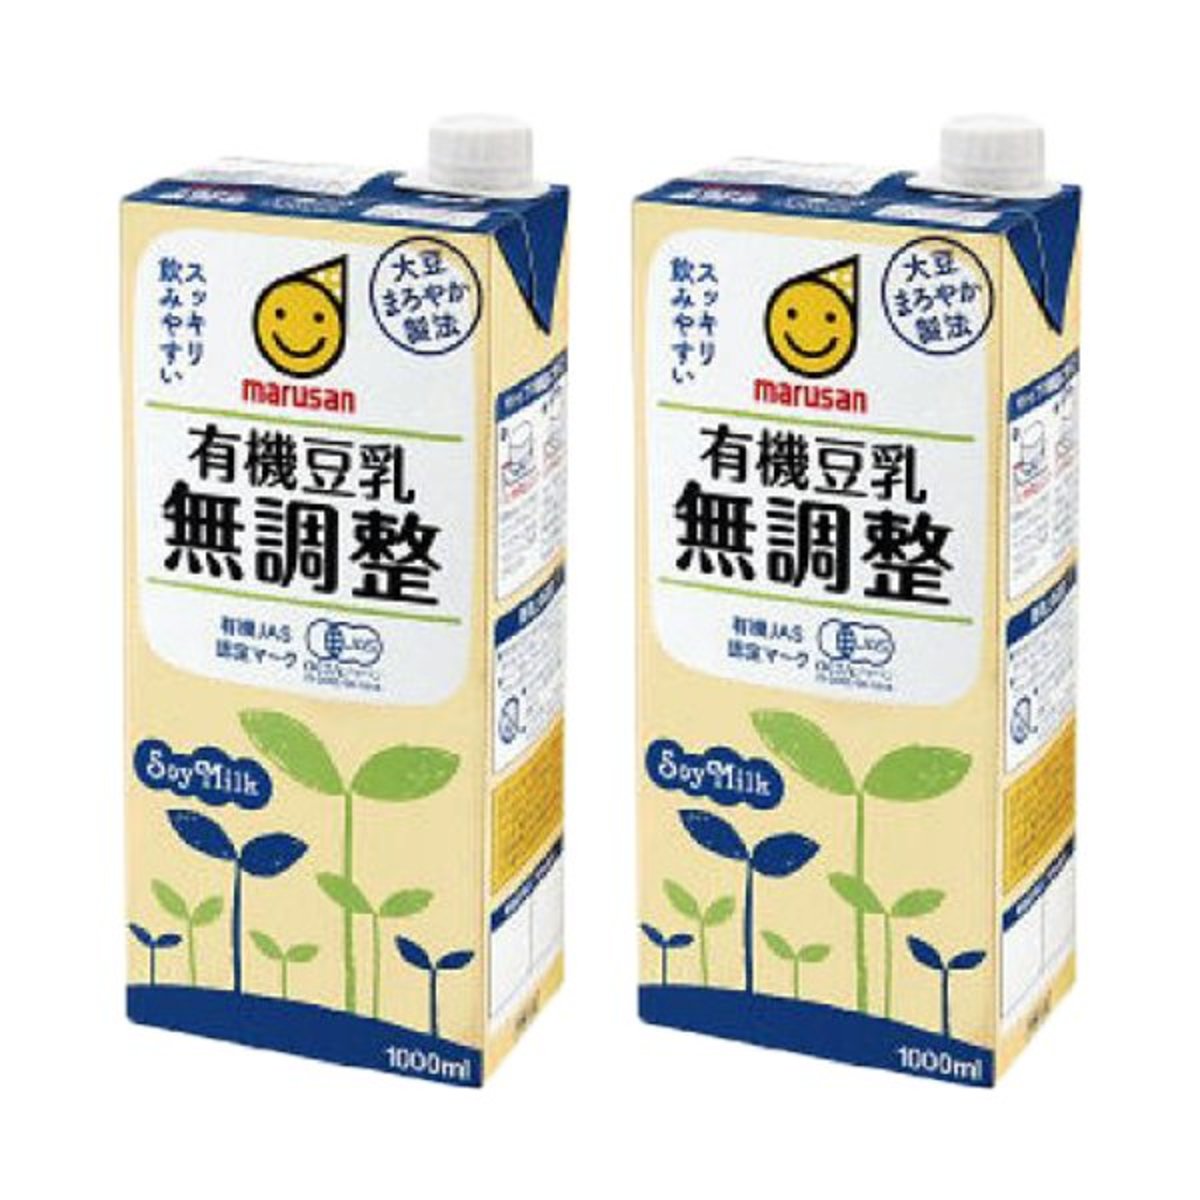 PURE SOY MILK PAPER PACK 1000ML x 2